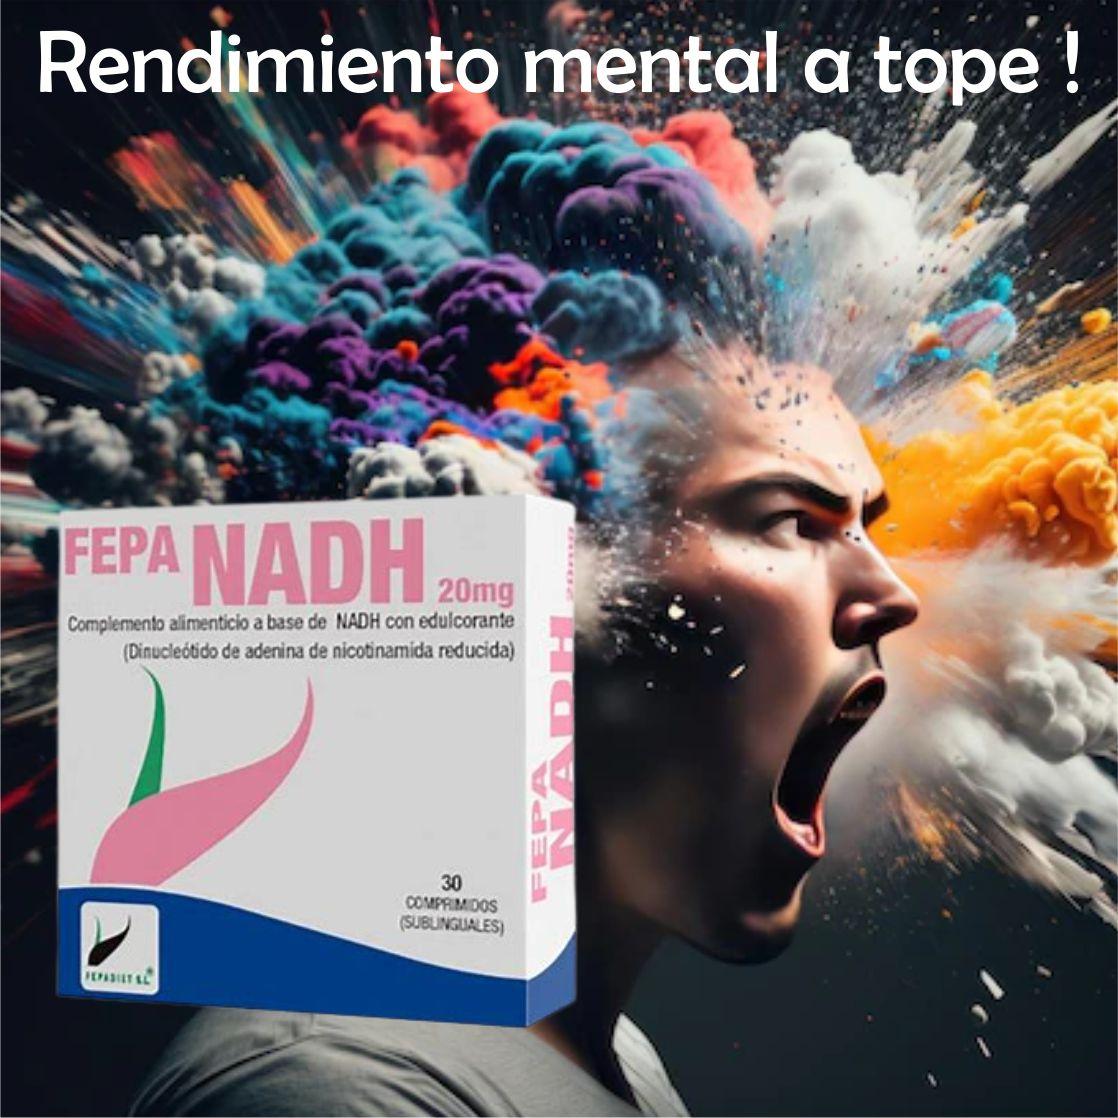 FEPA NADH, 30 COMPR. SUBLIMINGUALES.